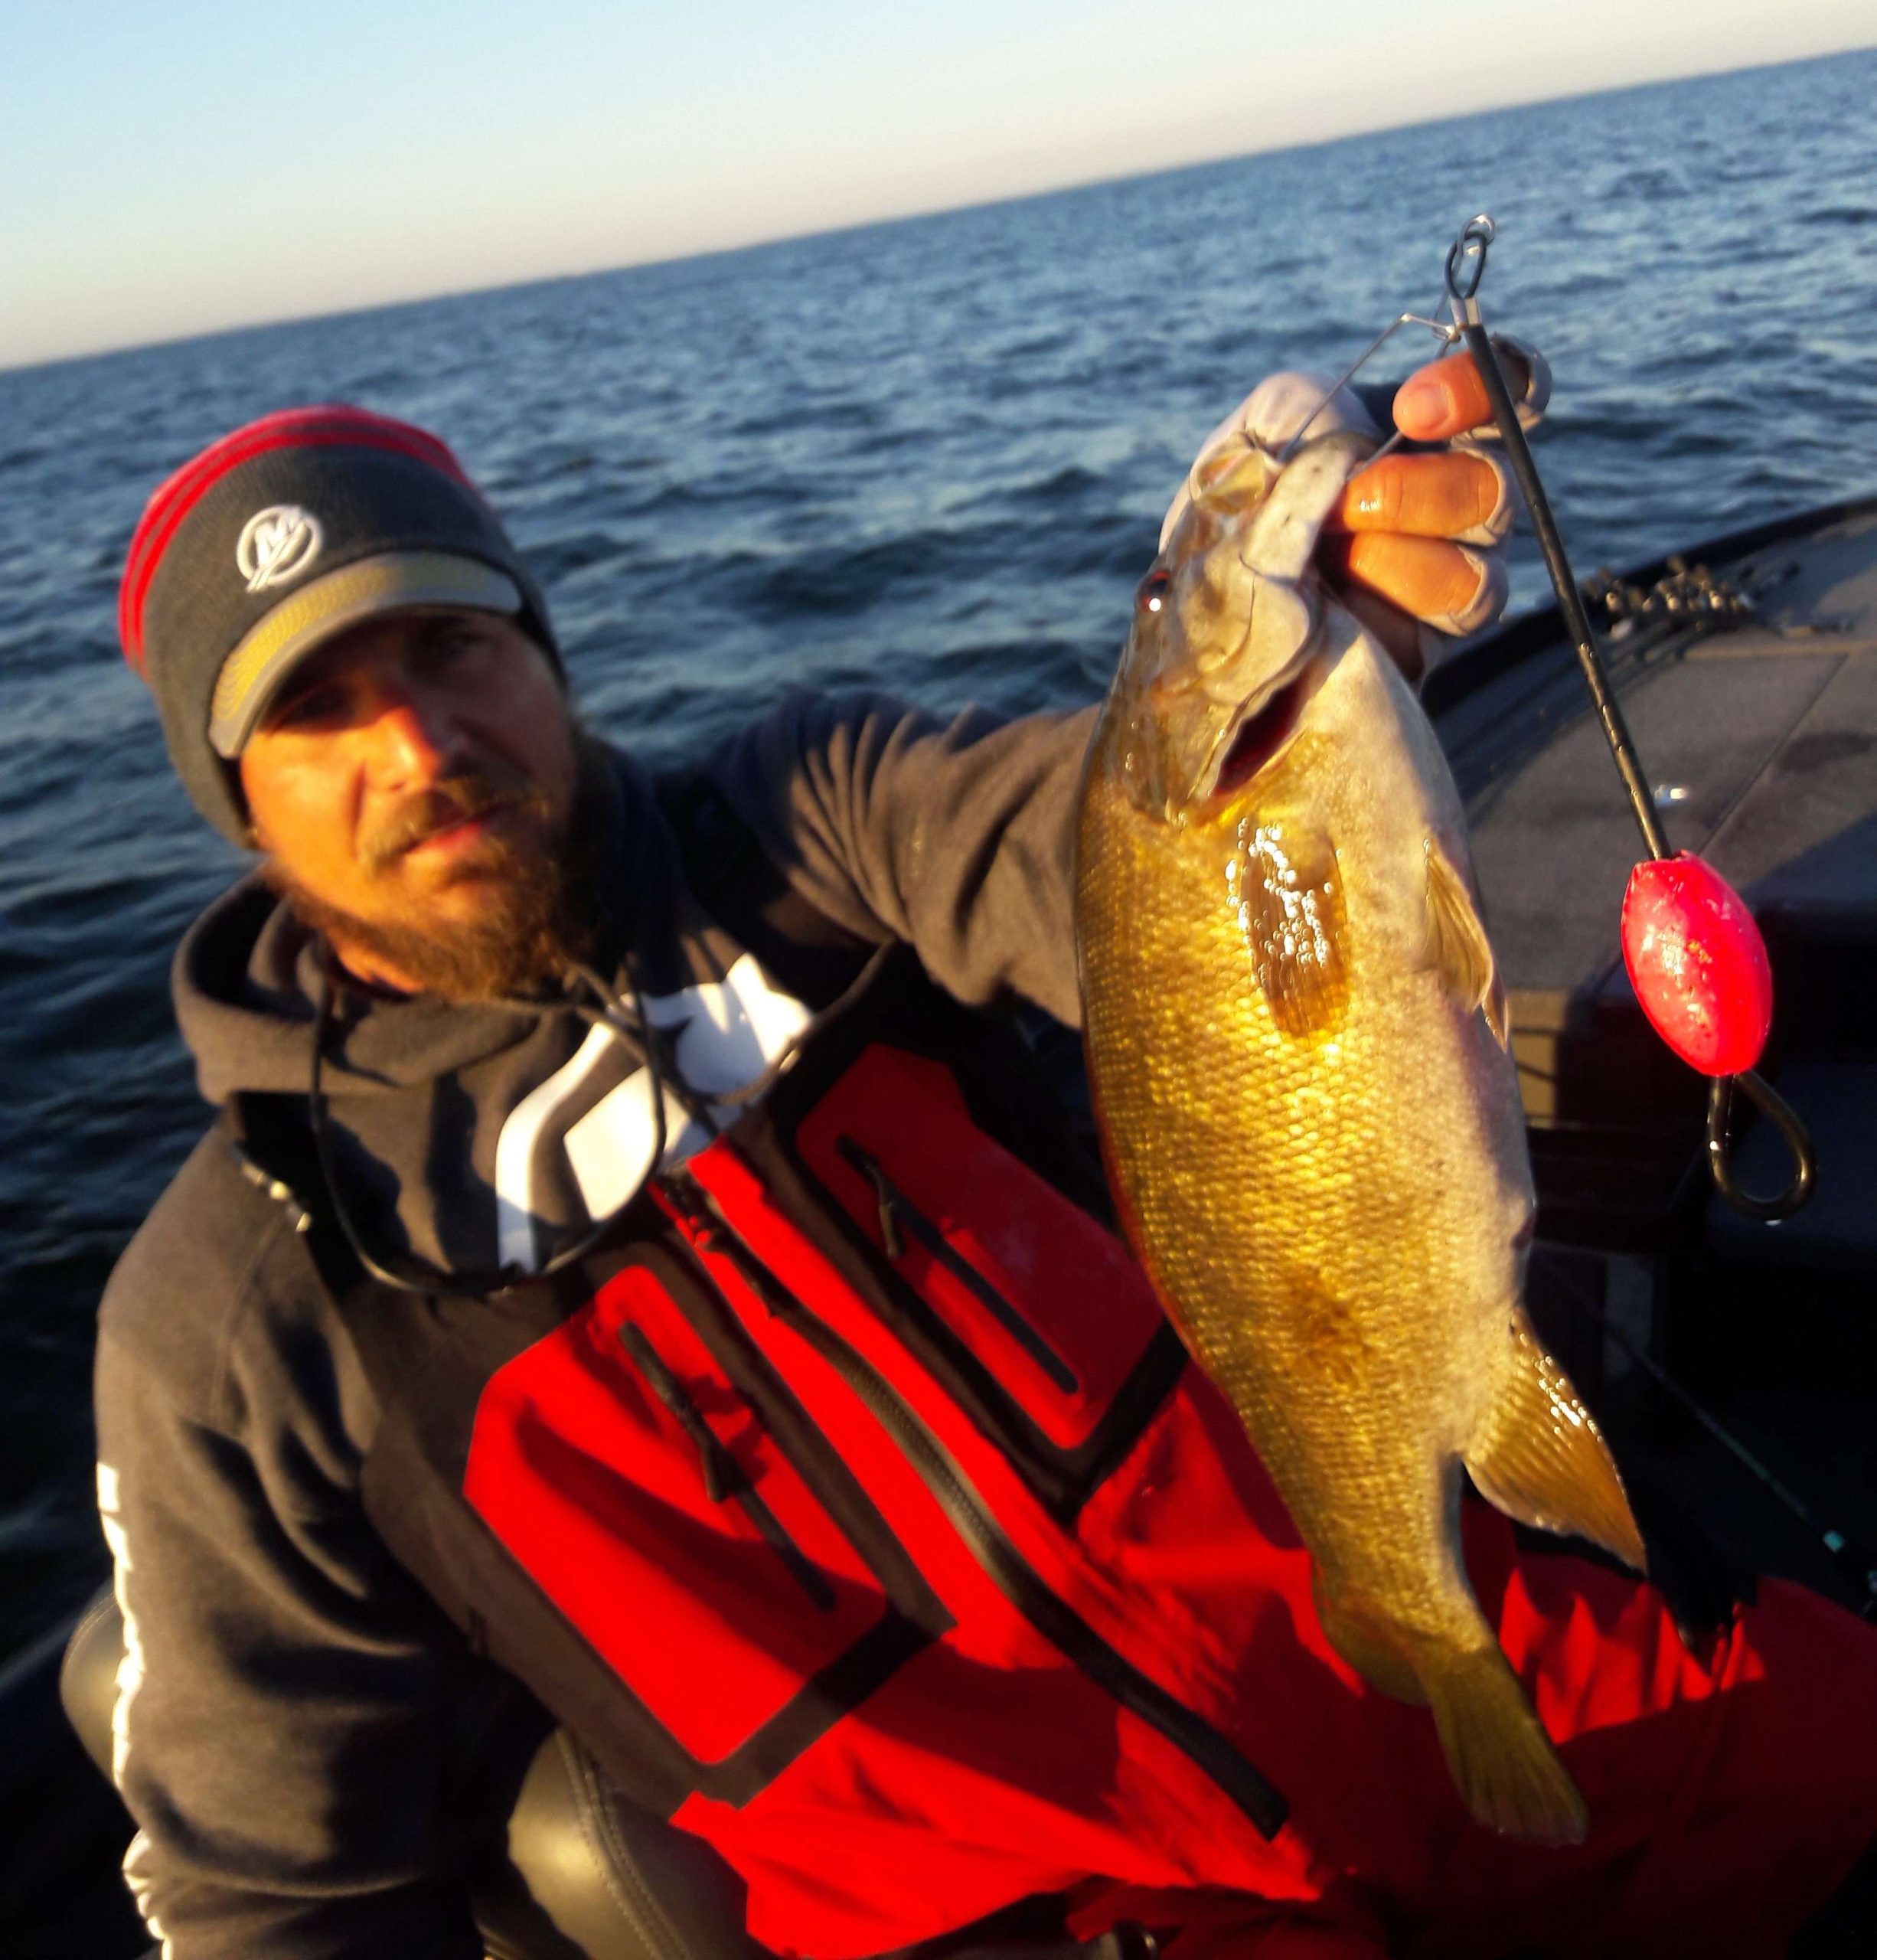 See the Sunday morning smallies collected from the final day blogs for the 2016 Toyota Bassmaster Angler of the Year Championship.